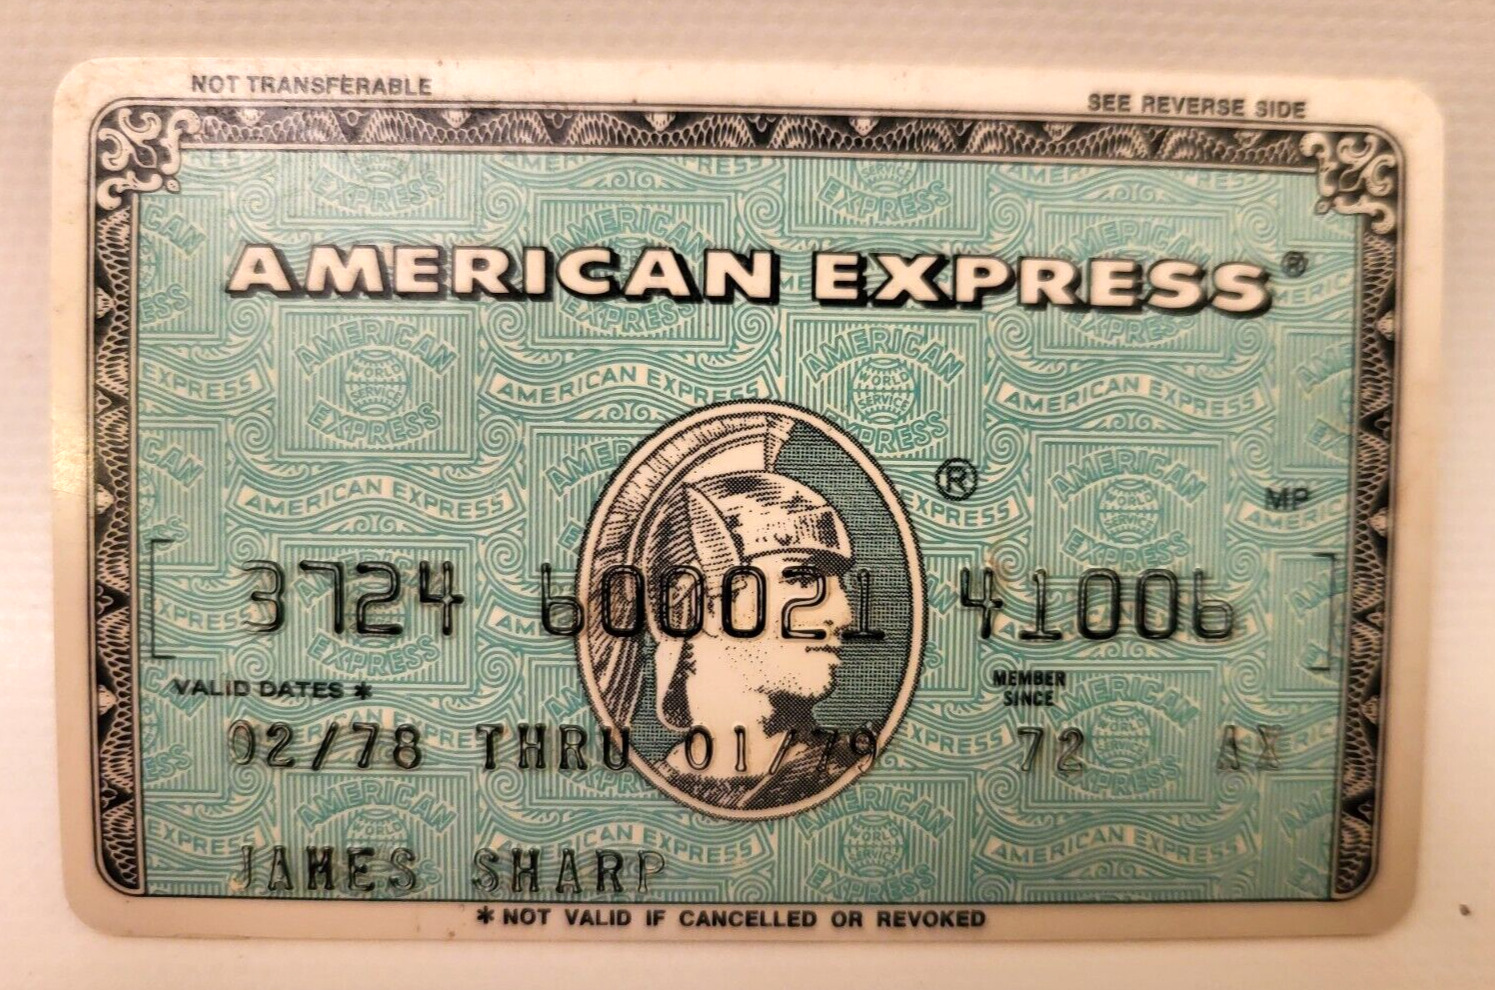 Genuine 1978 1970\'s Vintage Expired American Express Credit Card